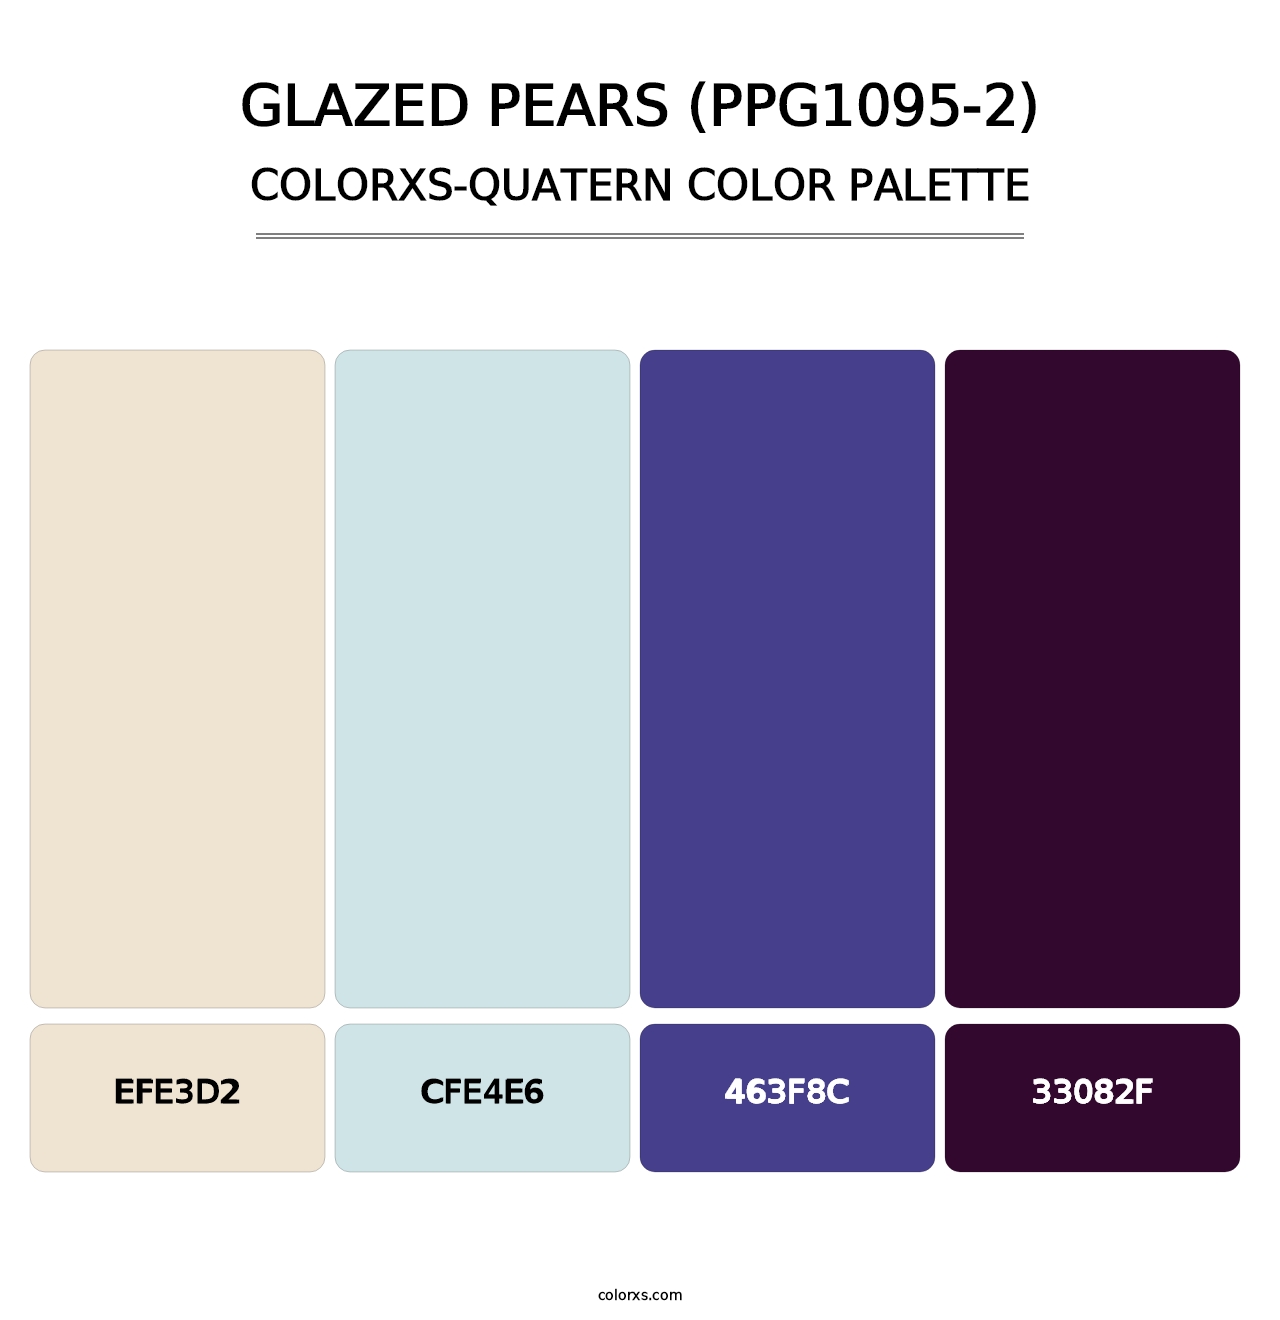 Glazed Pears (PPG1095-2) - Colorxs Quatern Palette